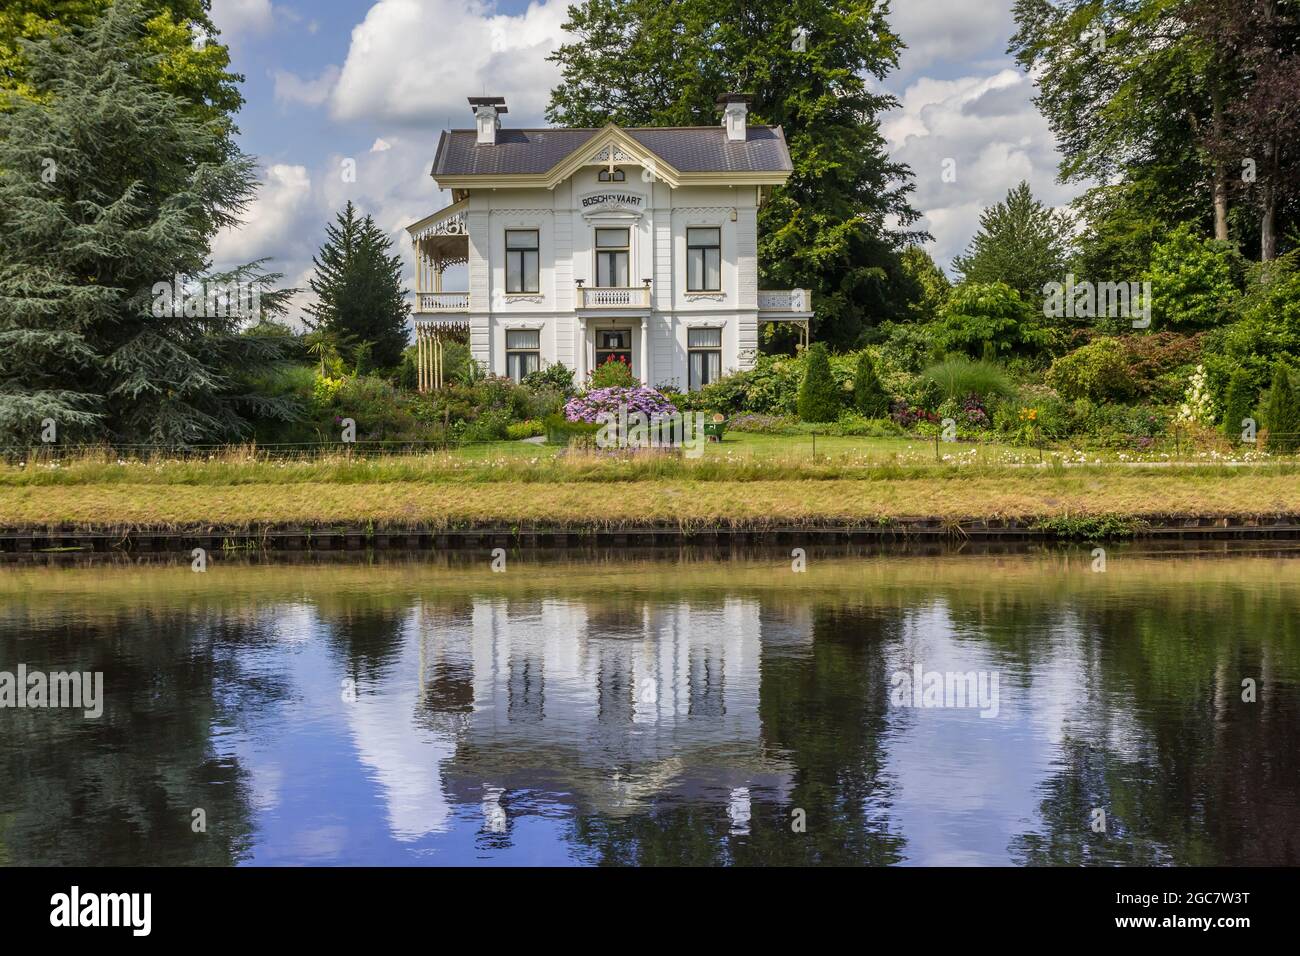 Historic white mansion at the Noord-Willems canal in Drenthe, Netherlands Stock Photo